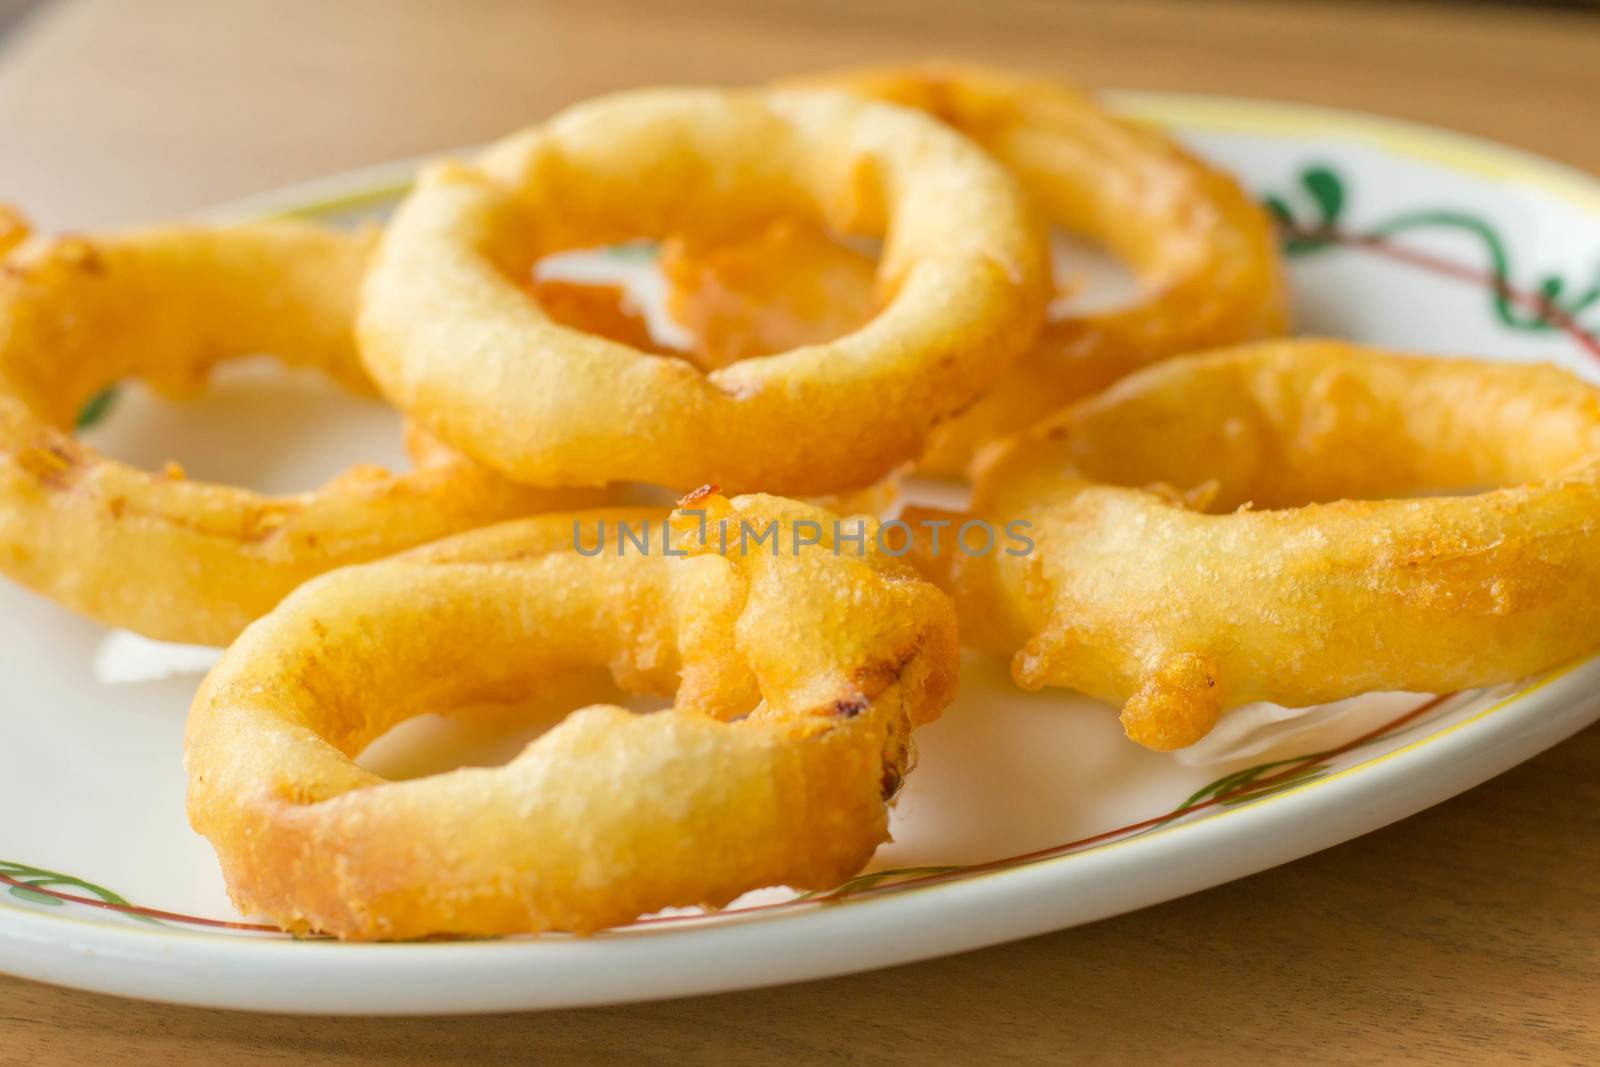 onion rings and dip sauce on the plate 